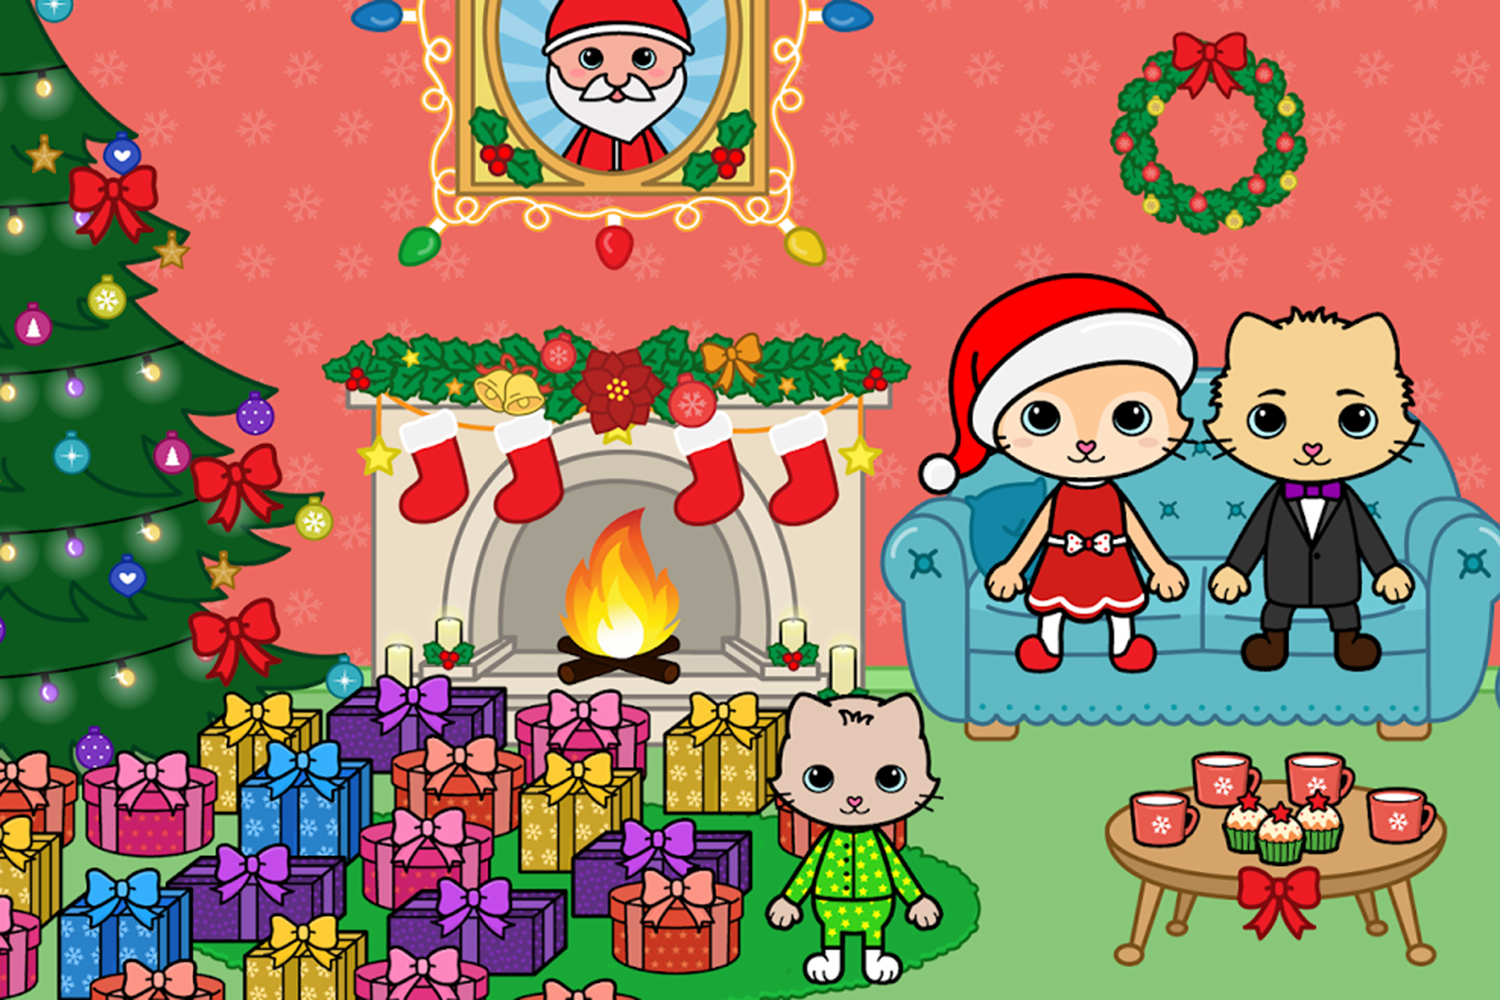 Hello Kitty Christmas Wreath Live Wallpaper - Festive and Cute! - free  download